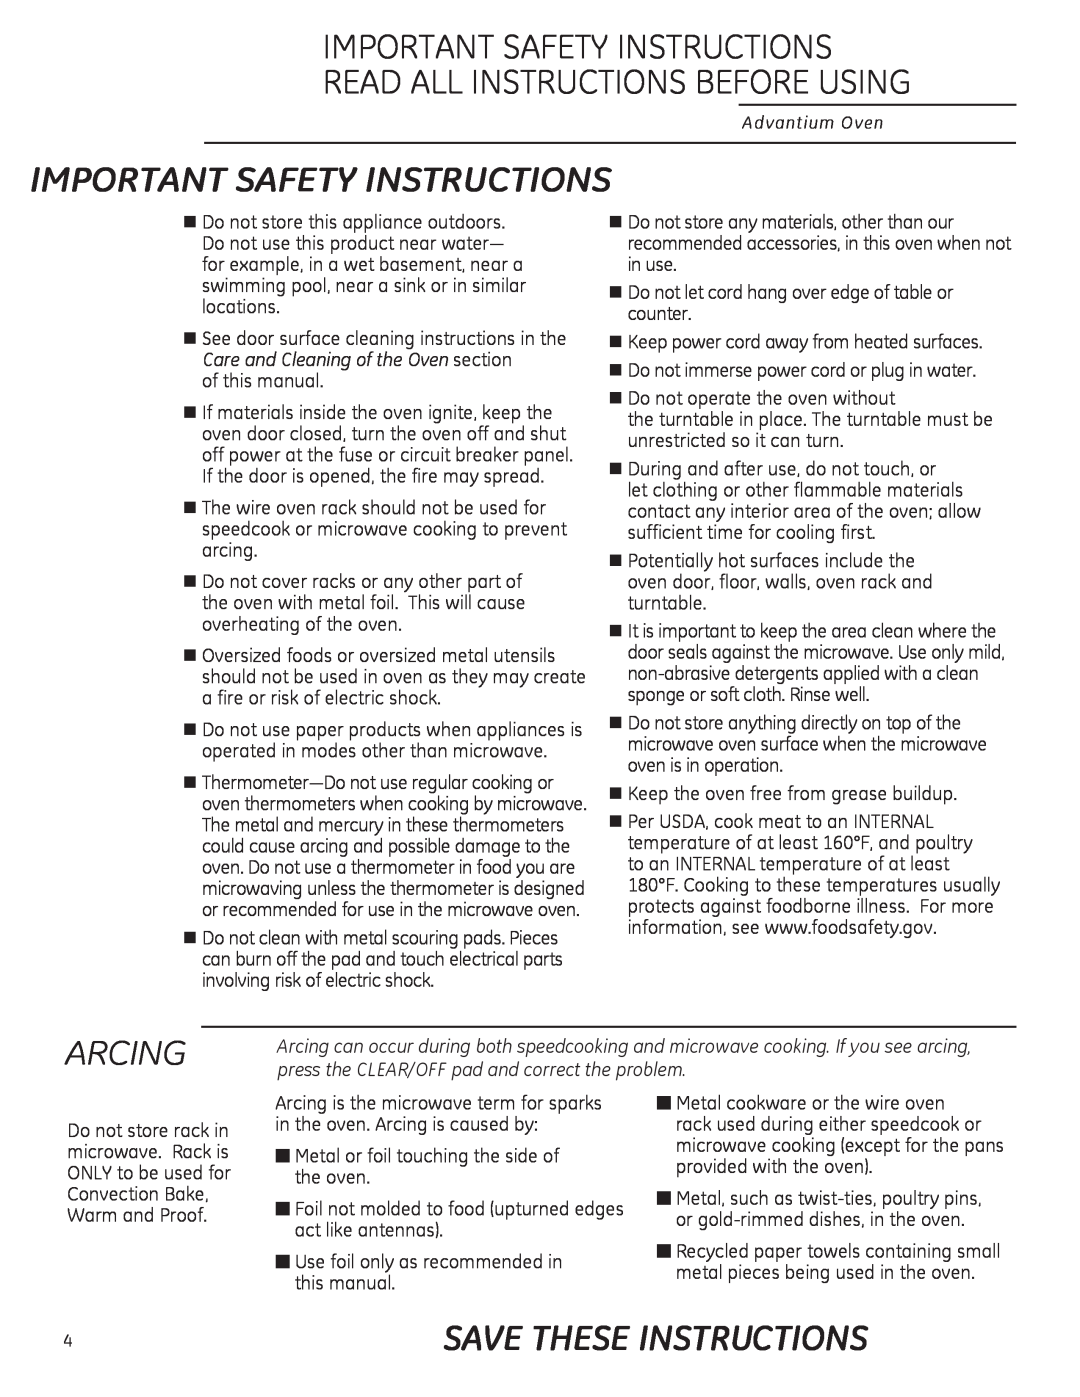 GE ZSA2201 owner manual Arcing, Save These Instructions, Important Safety Instructions Read All Instructions Before Using 